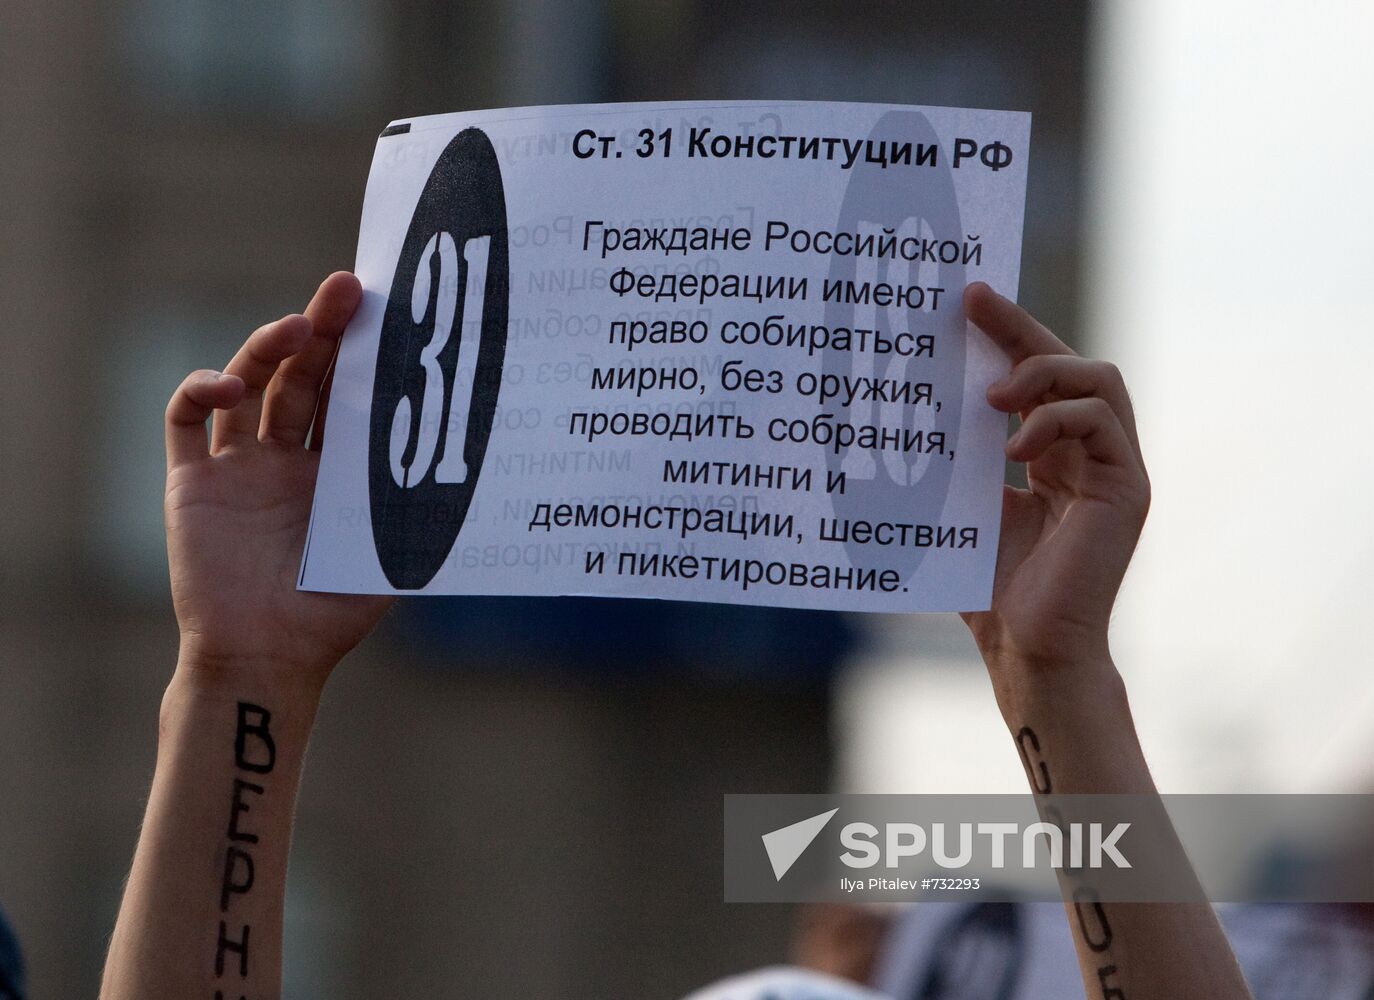 Rally in support of Article 31 of the Constitution in Moscow